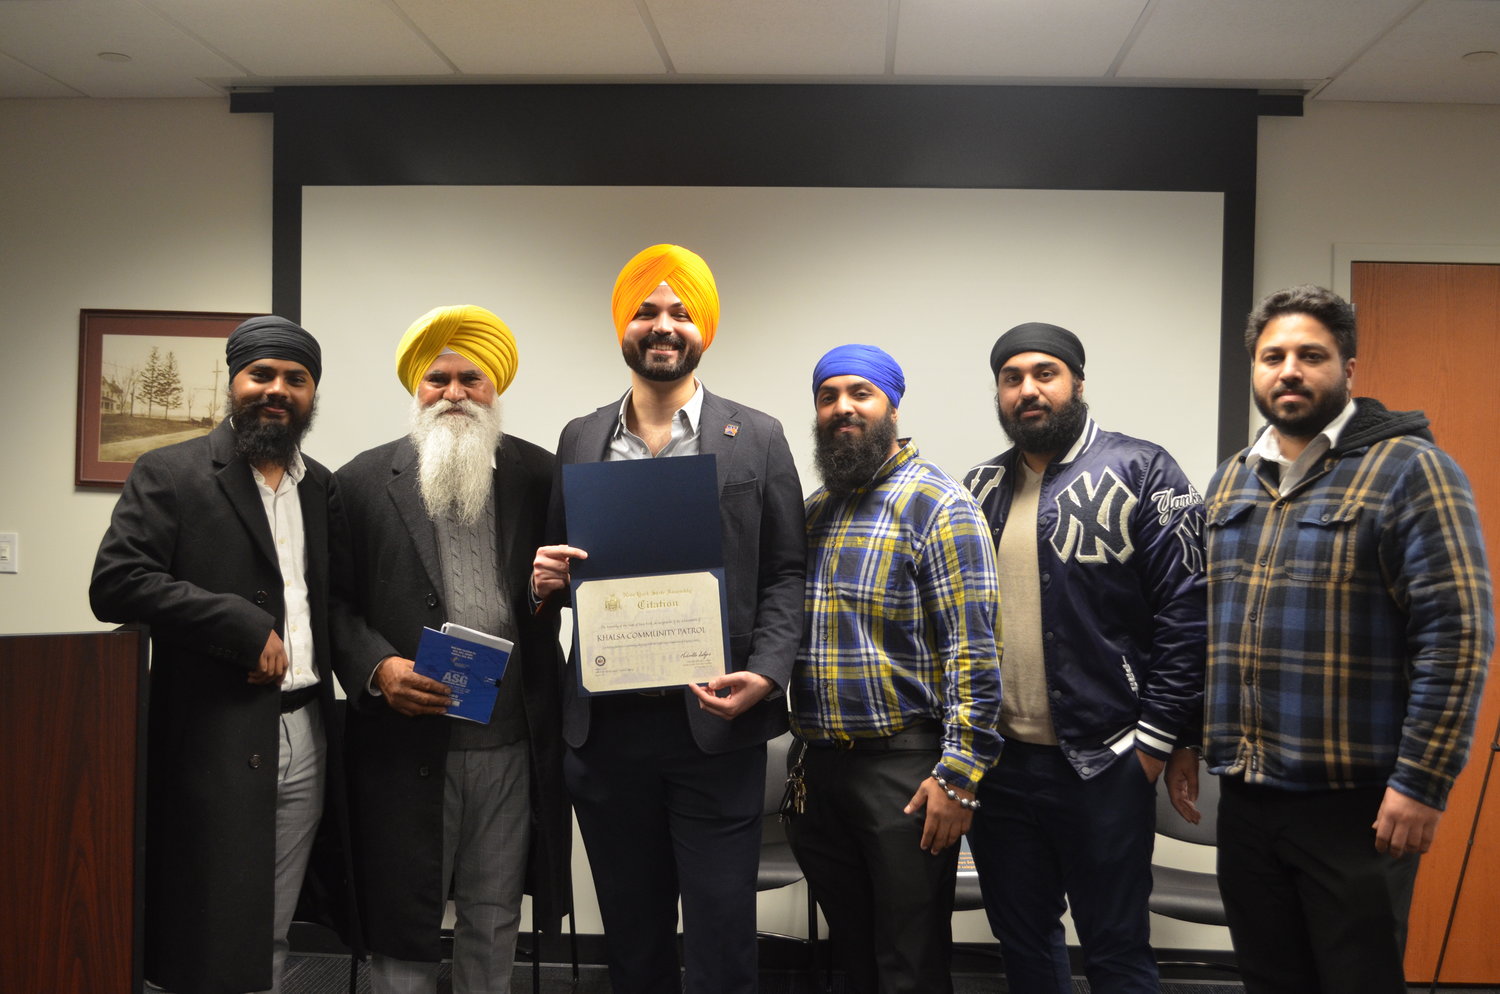 Gurpreet Singh, far left, Daler Singh, Japneet Singh, Chitinderpal Singh, Gurjot Singh and Harmanpreet Singh are leaders in the Sikh community of Richmond Hill, Queens, who participated in the South Asian Town Hall at Elmont Memorial Public Library. One of their organizations, the Khalsa Community Patrol, strives to make the neighborhood safer for those impacted by the rise in hate crimes in the area.